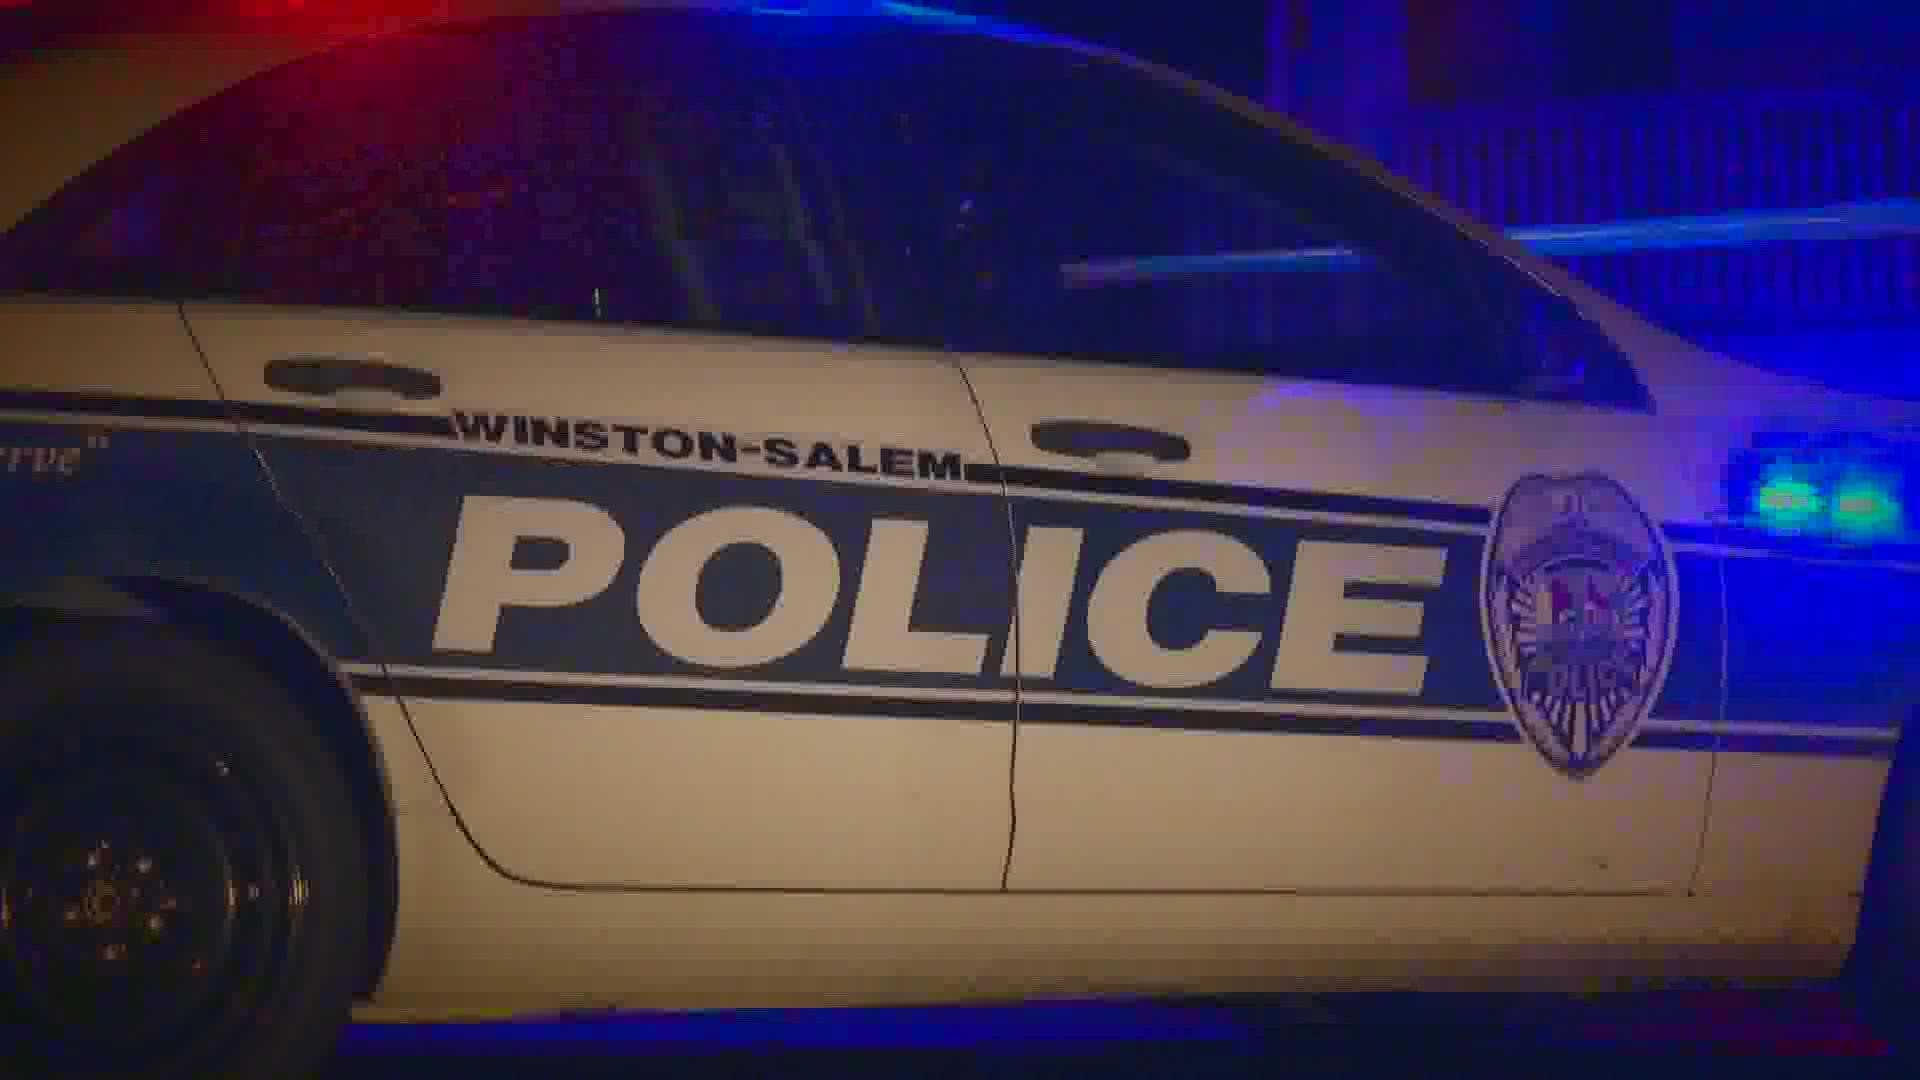 Winston-Salem police said it will take the community coming together to address the rise in crime.